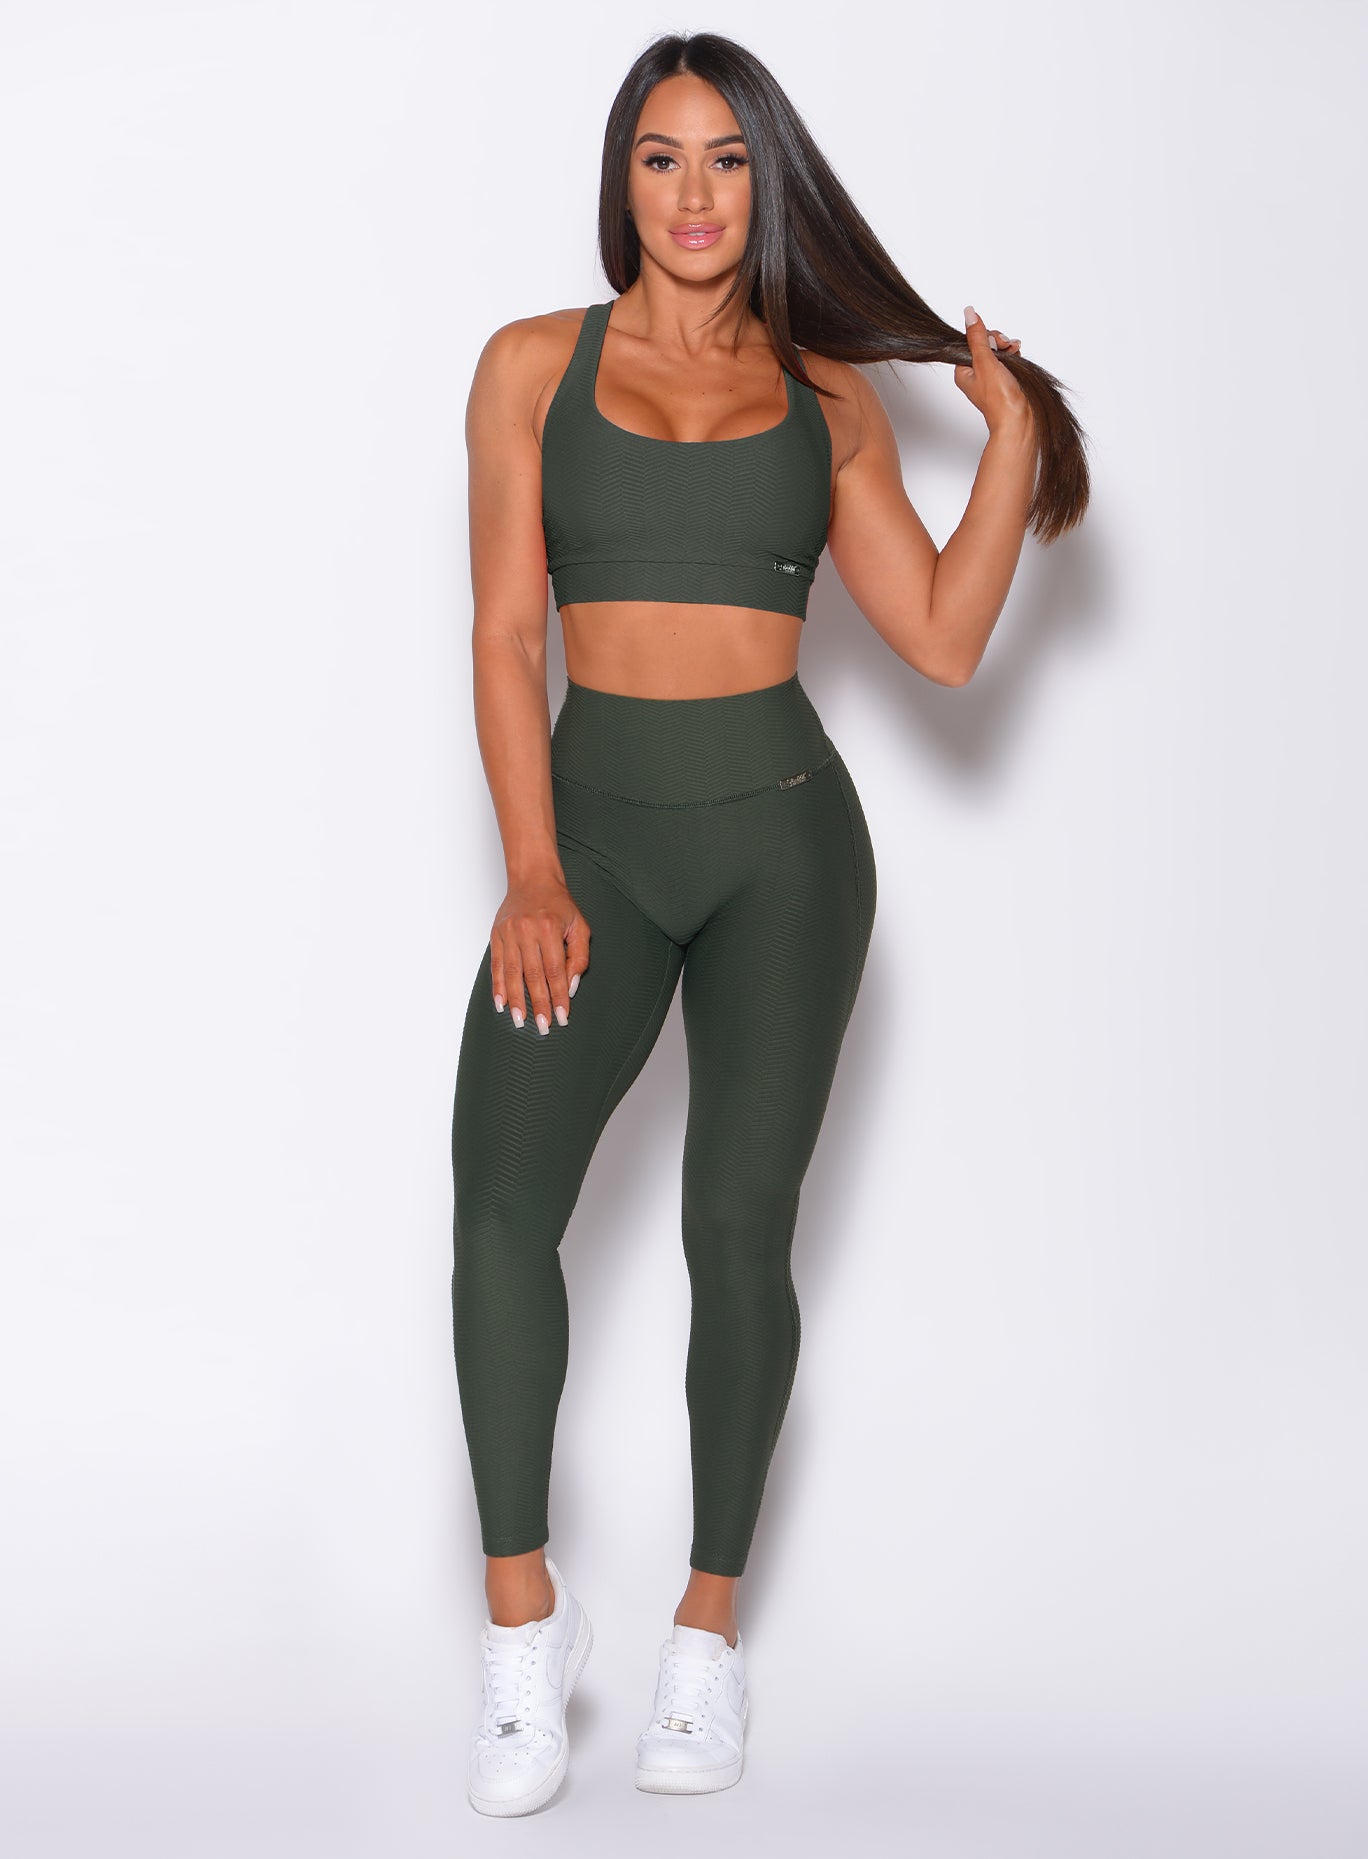 Front profile view of a model in our Chevron Leggings in lucky green color and matching bra